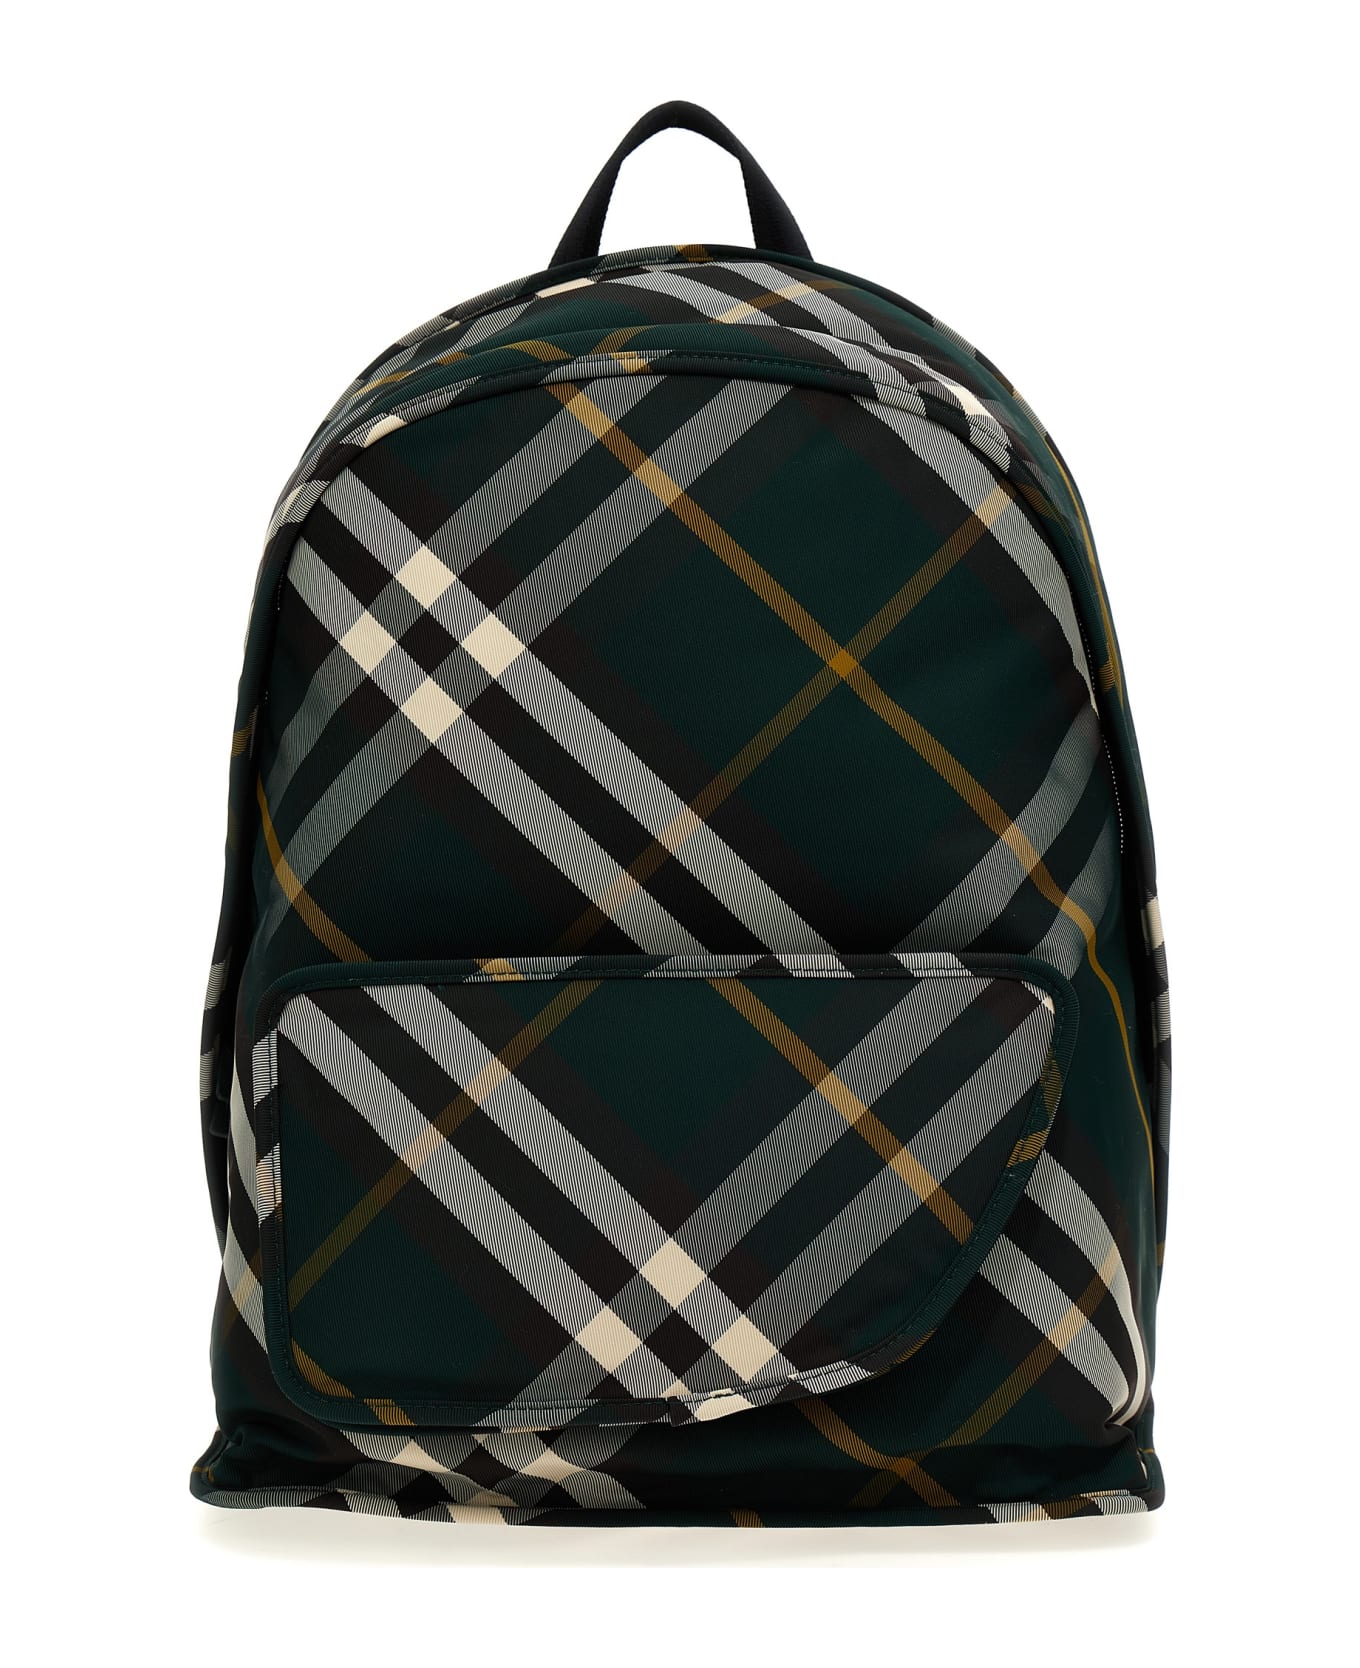 Burberry 'shield' Backpack - Green